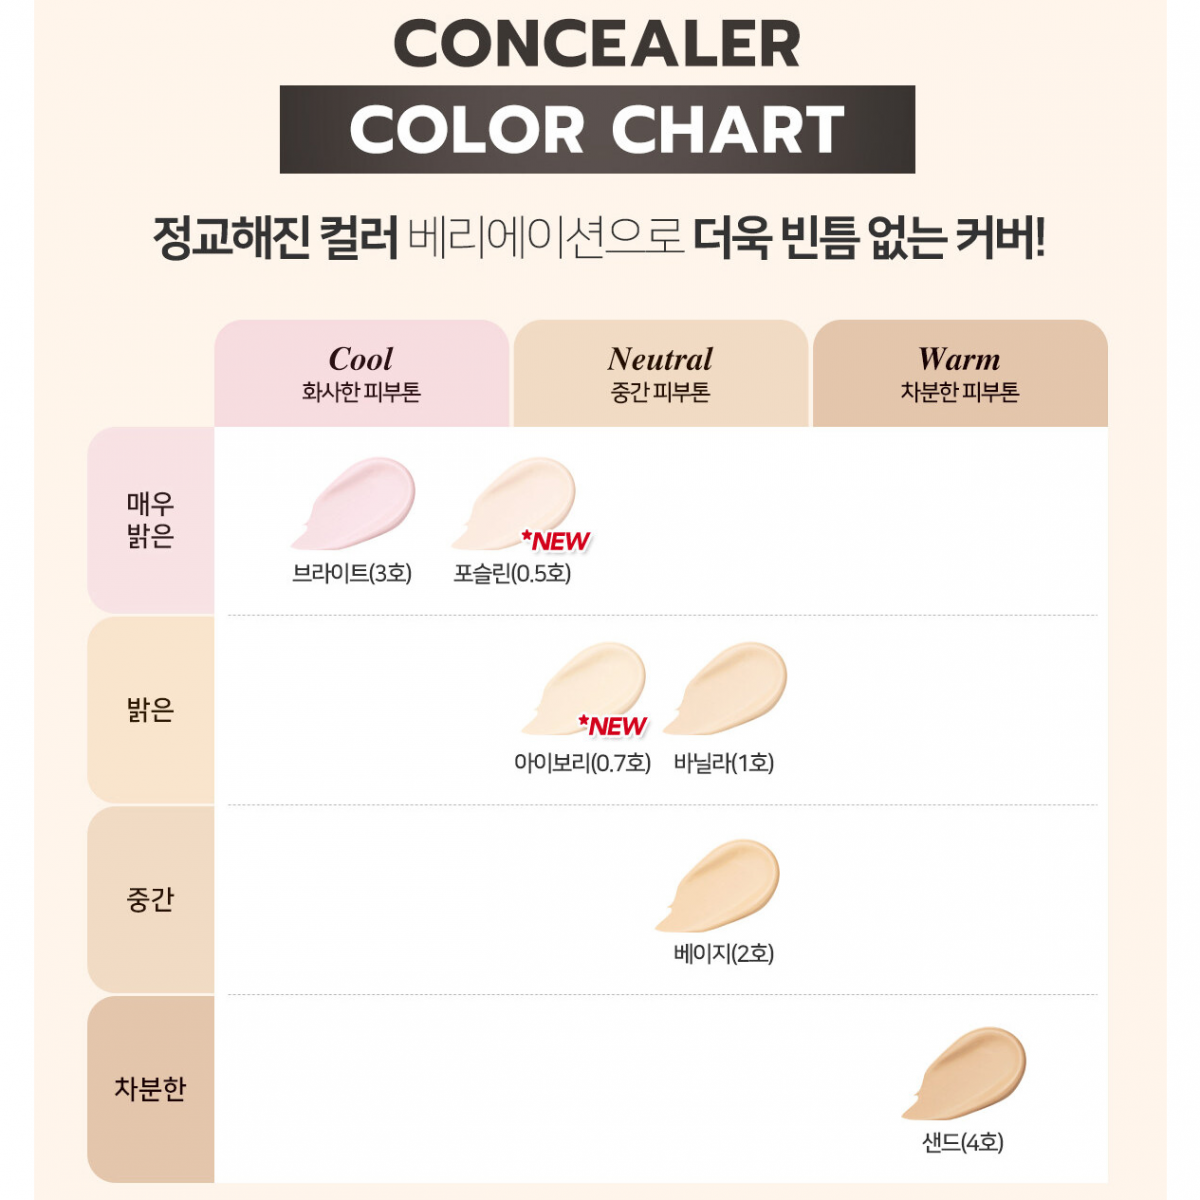 *Long Lasting Tip Concealer Cover-Fit 7.5g #03 Bright(8801046275139)[Parallel Import]